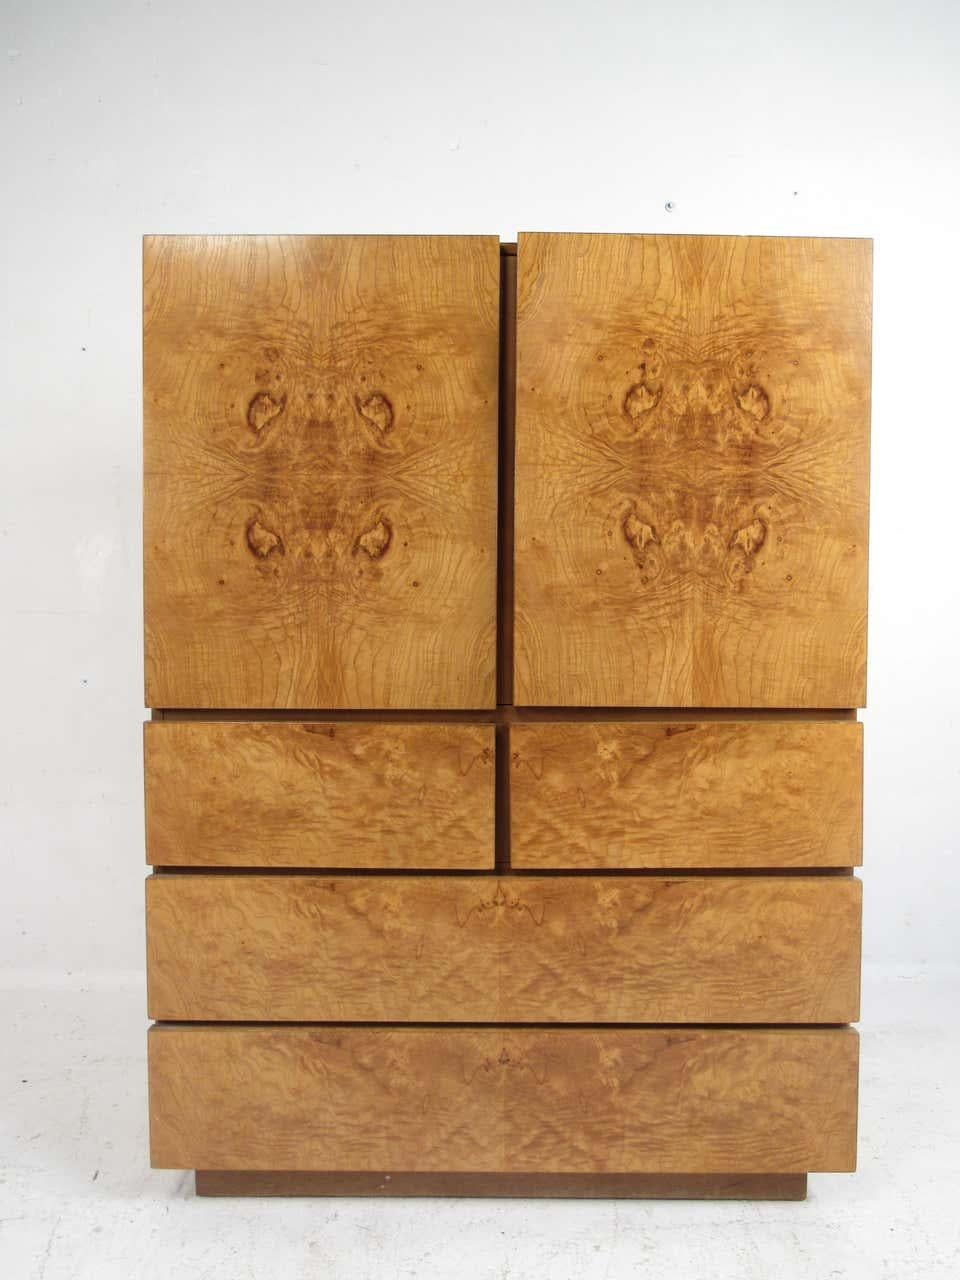 This impressive vintage modern highboy dresser. Well-made case piece with straight lines and an elegant burl wood grain throughout. A gently used wardrobe/armoire with a storage compartment on top hidden by two cabinet doors. This Milo Baughman